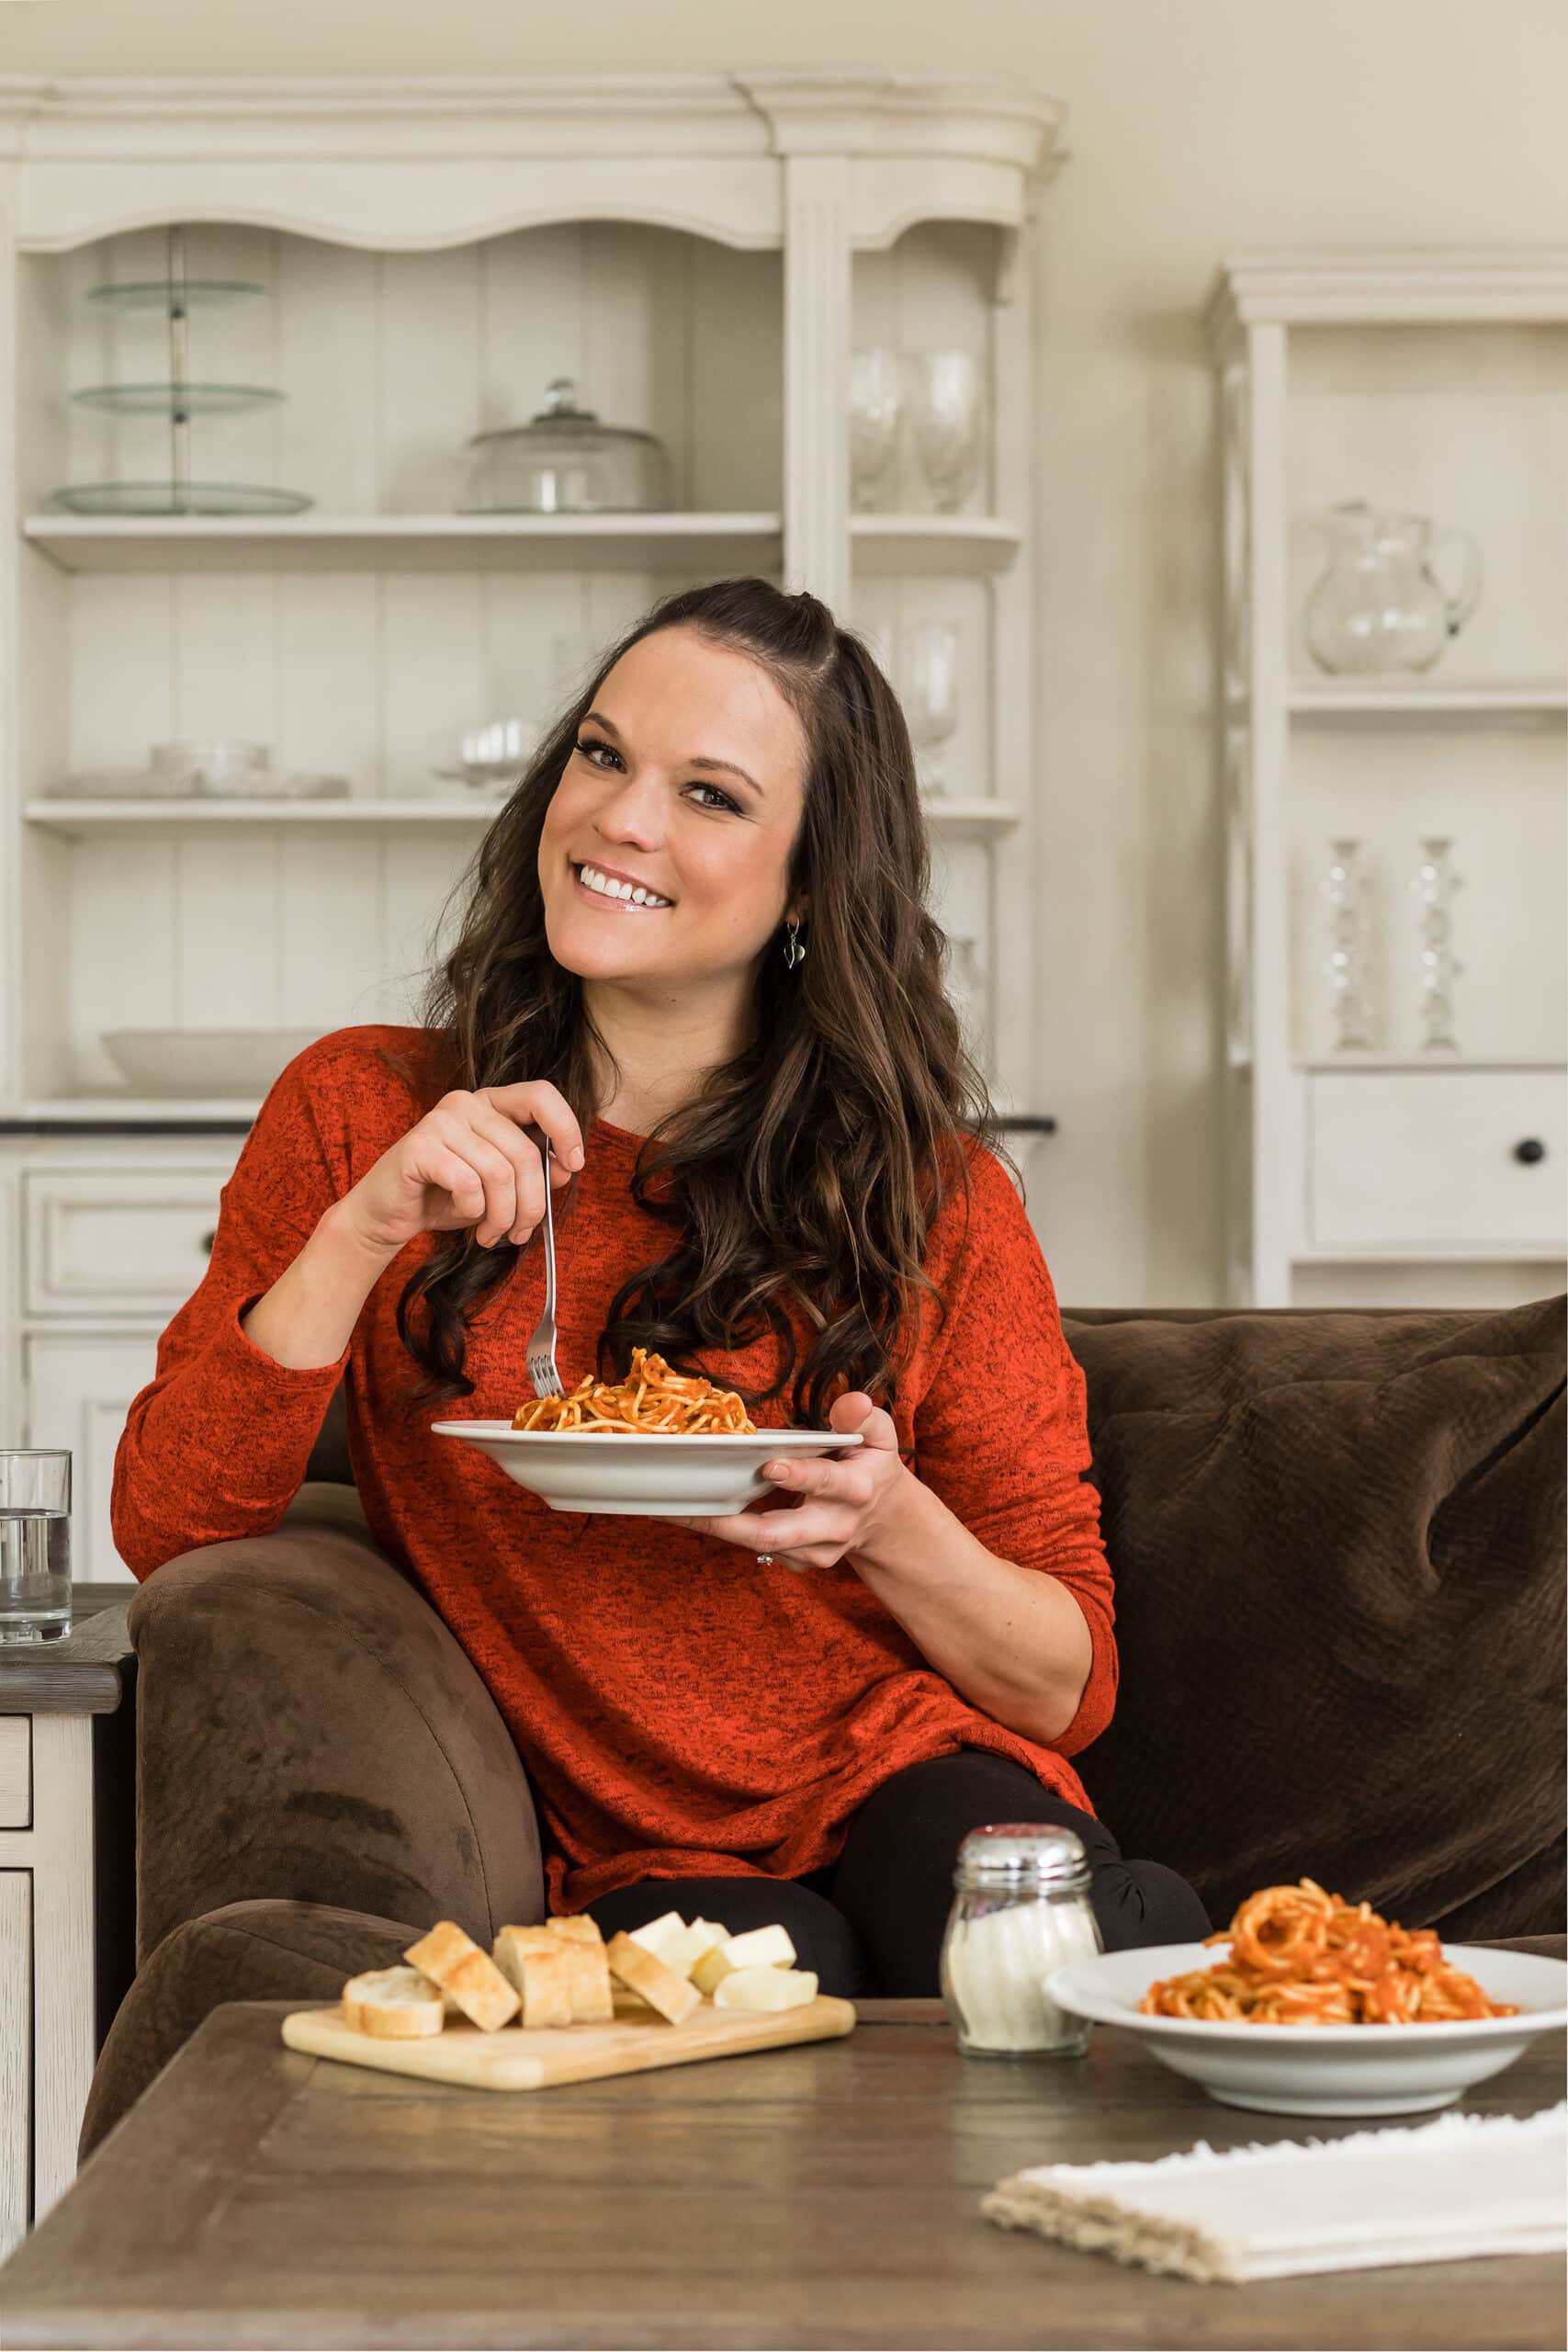 Stephanie Melchione (The Cozy Cook) sitting on a couch with a plate of spaghetti.